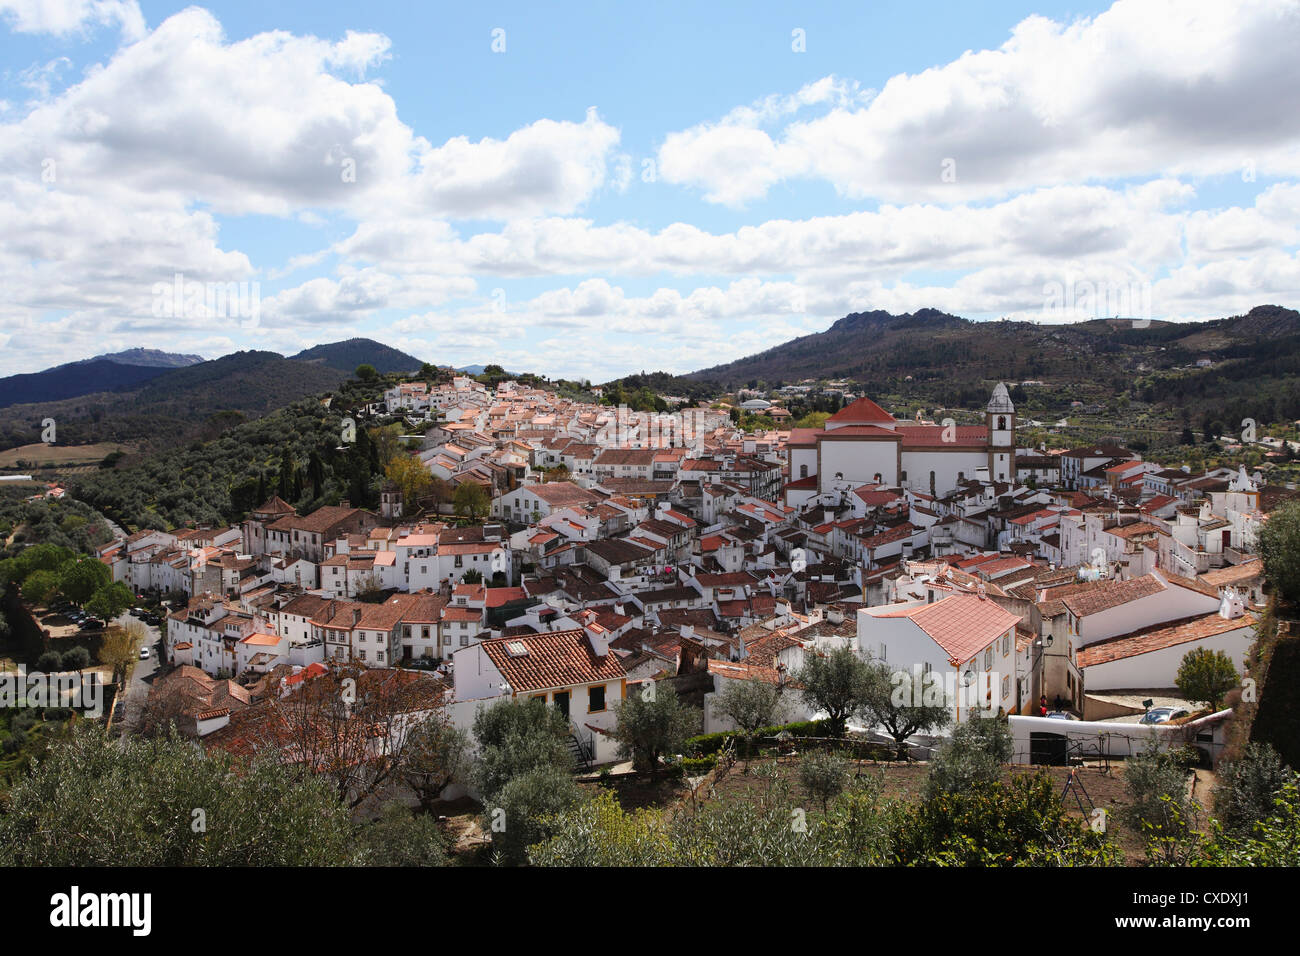 The tile roofs of houses in the walled city of Castelo de Vide, Alentejo, Portugal Stock Photo